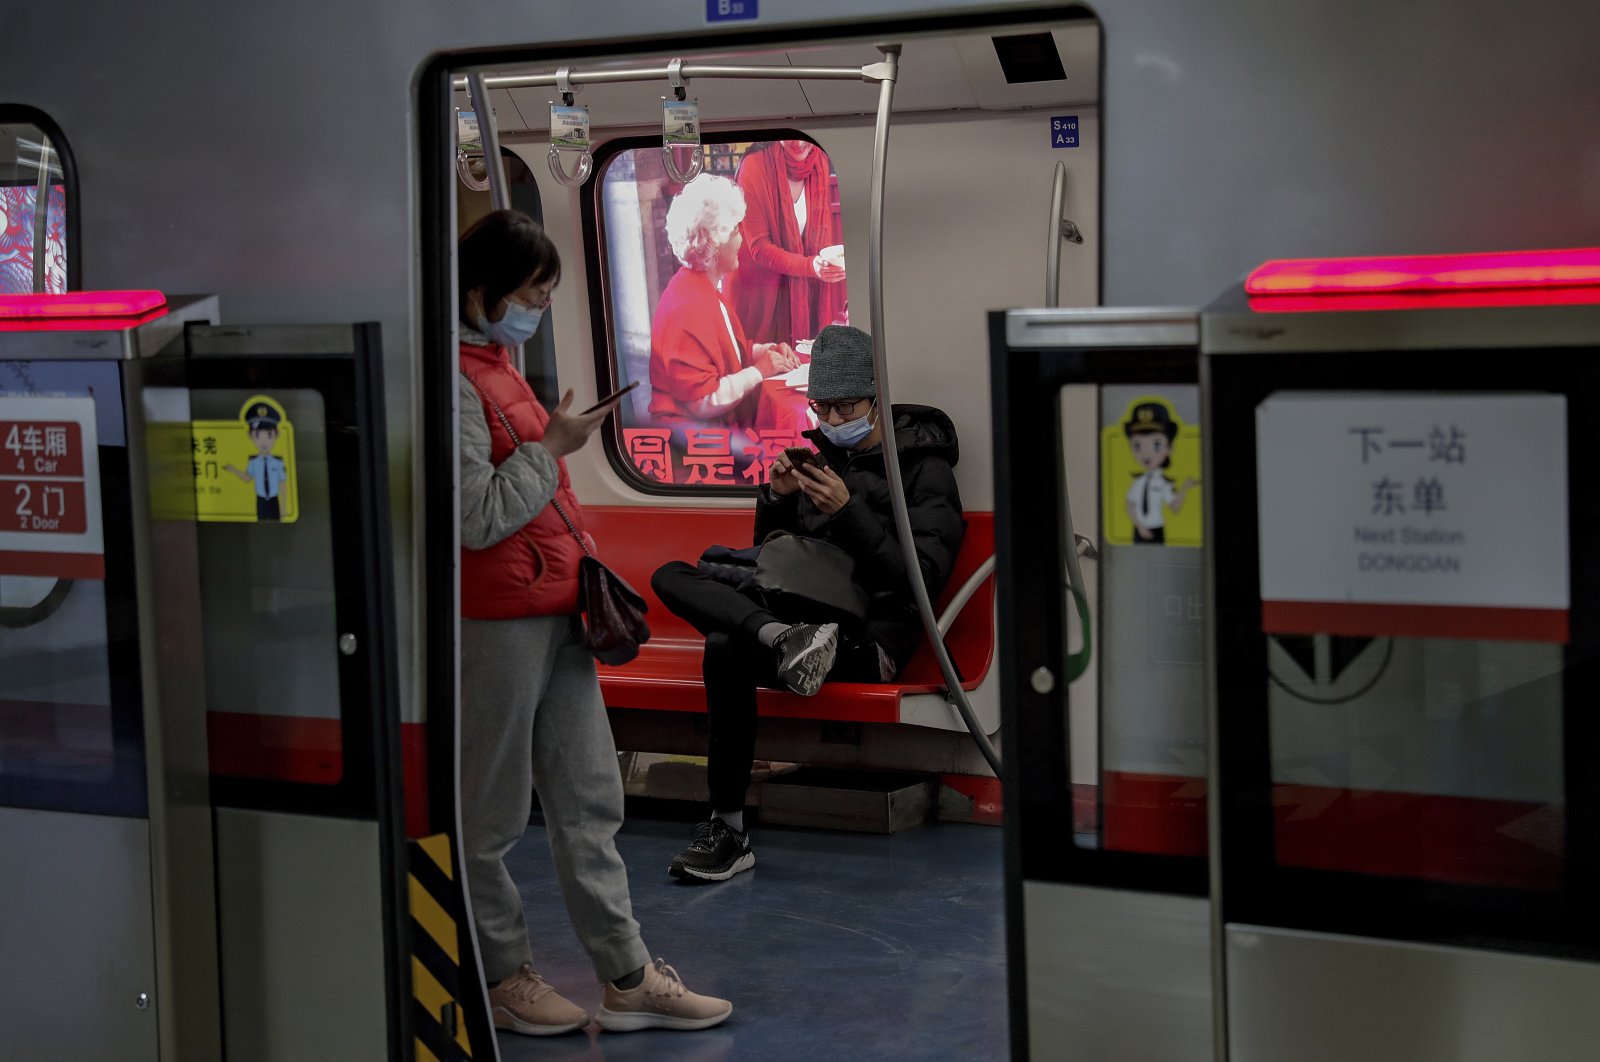 Commuters wearing face masks to help curb the spread of the coronavirus browse their smartphones inside a subway train in Beijing, China, Feb. 10, 2021. (AP Photo)